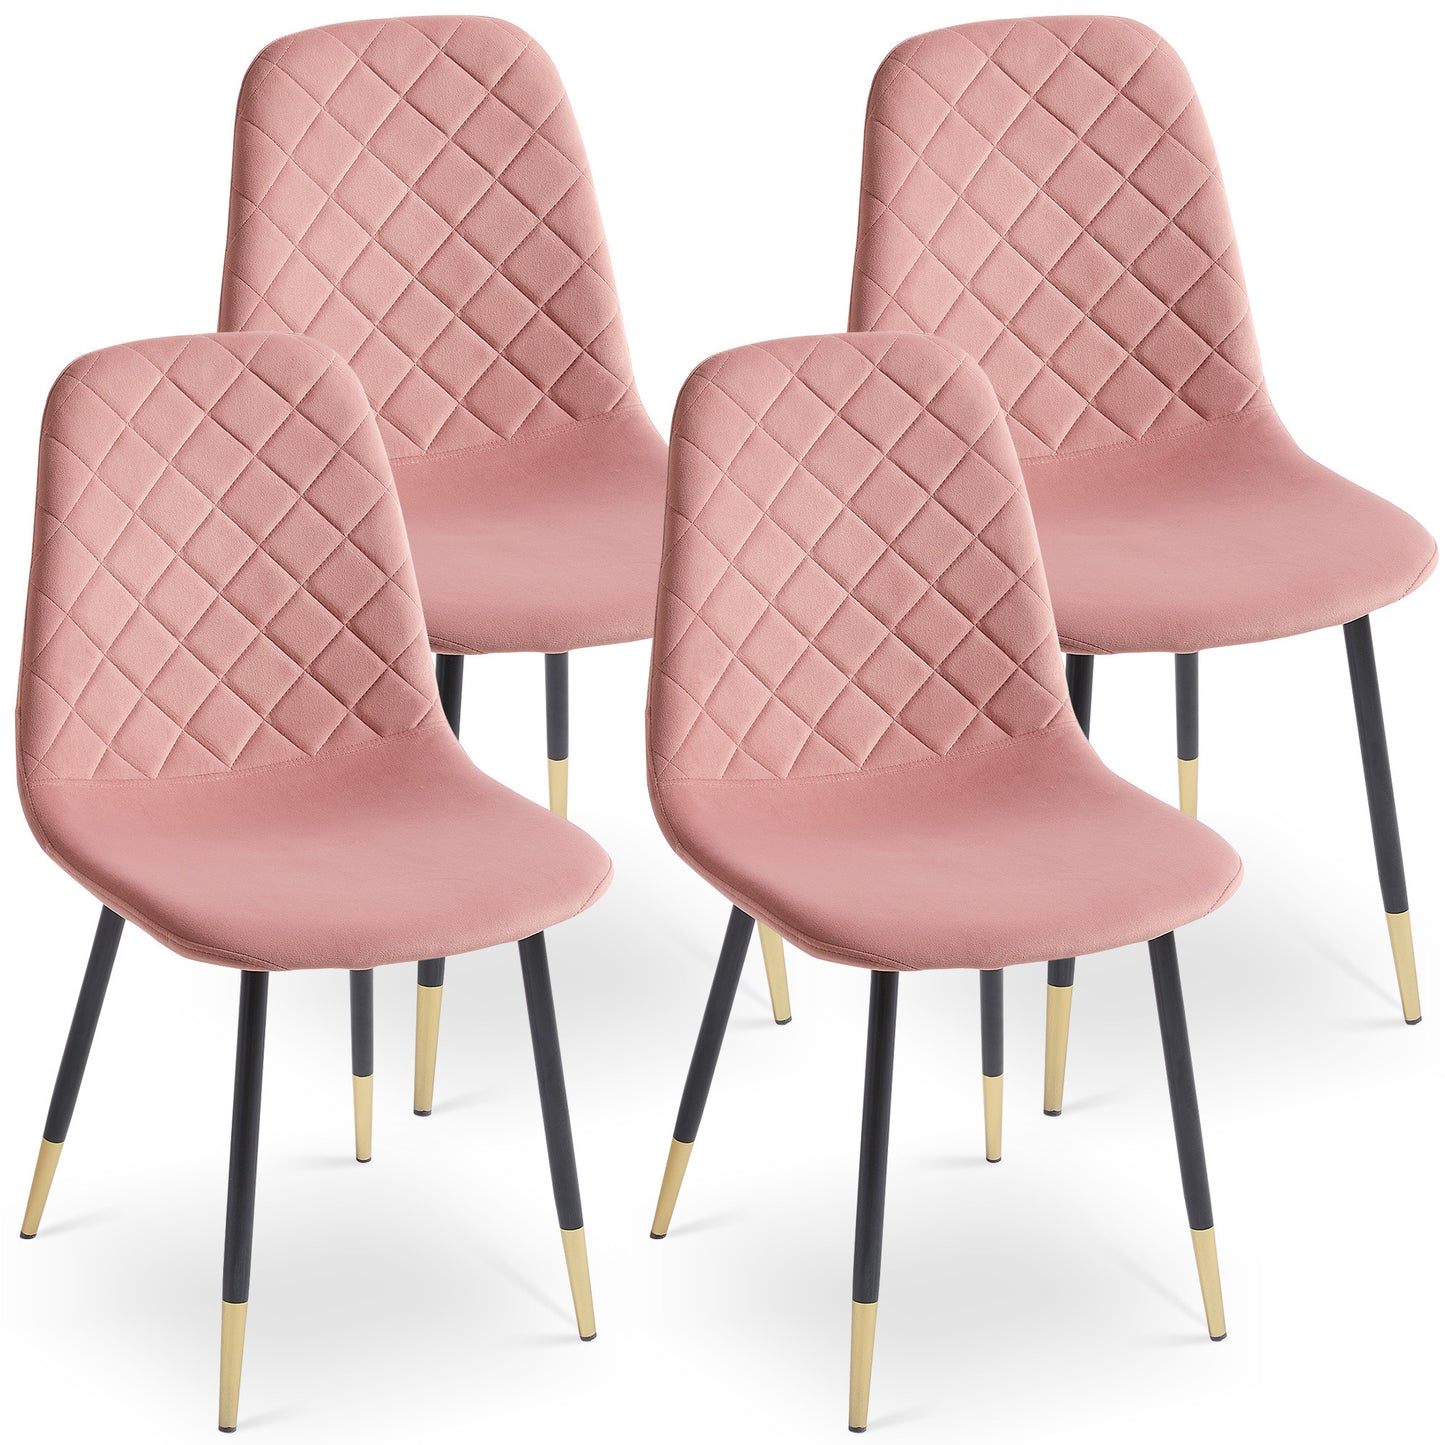 Pink Velvet Tufted Accent Chairs with Gold Metal Legs, Modern Dining Chairs for Living Room,Set of 4